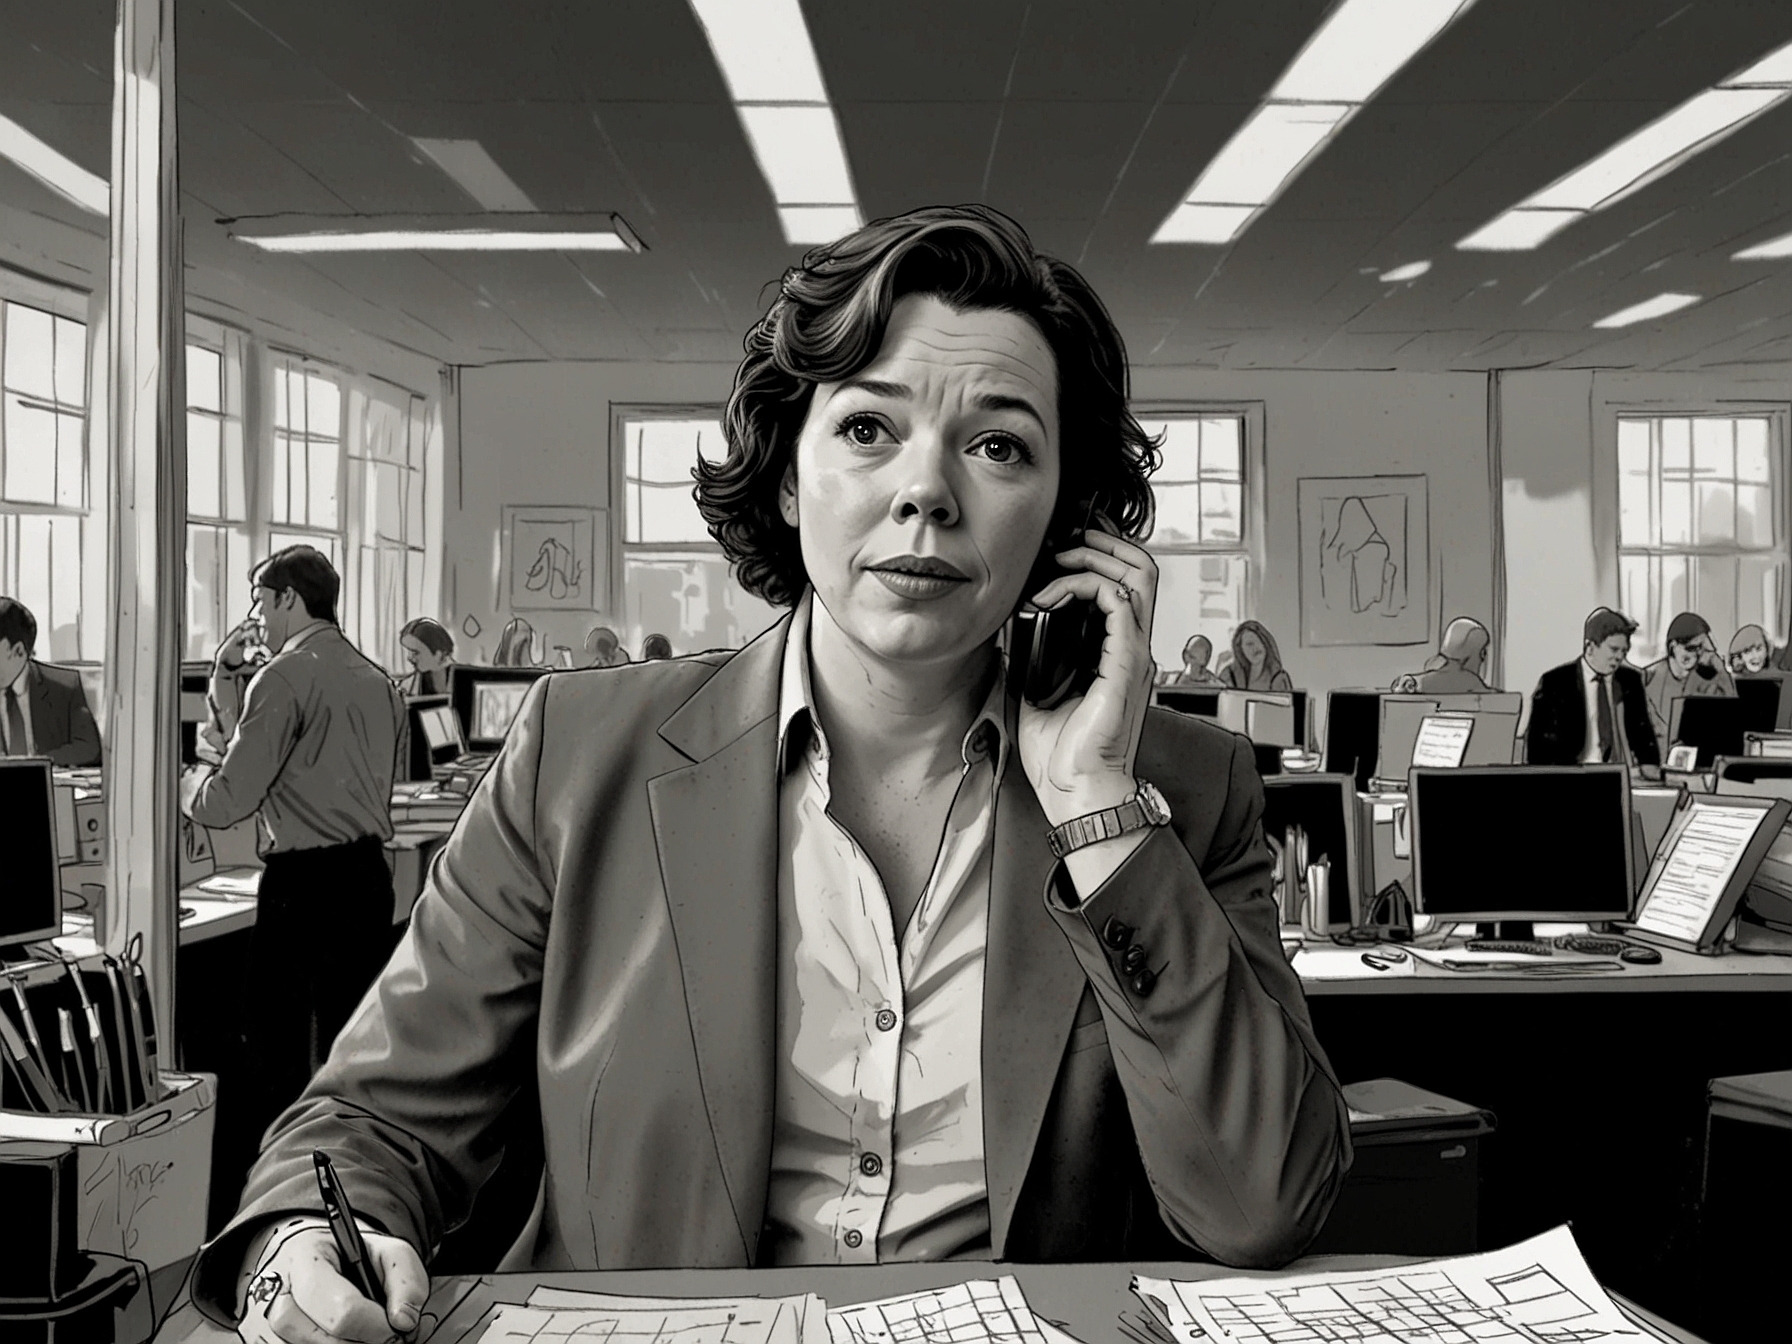 Olivia Colman, as Douglas's publicist, urgently speaking on the phone with a background of chaotic office settings, embodying the frantic efforts to manage a public relations crisis.